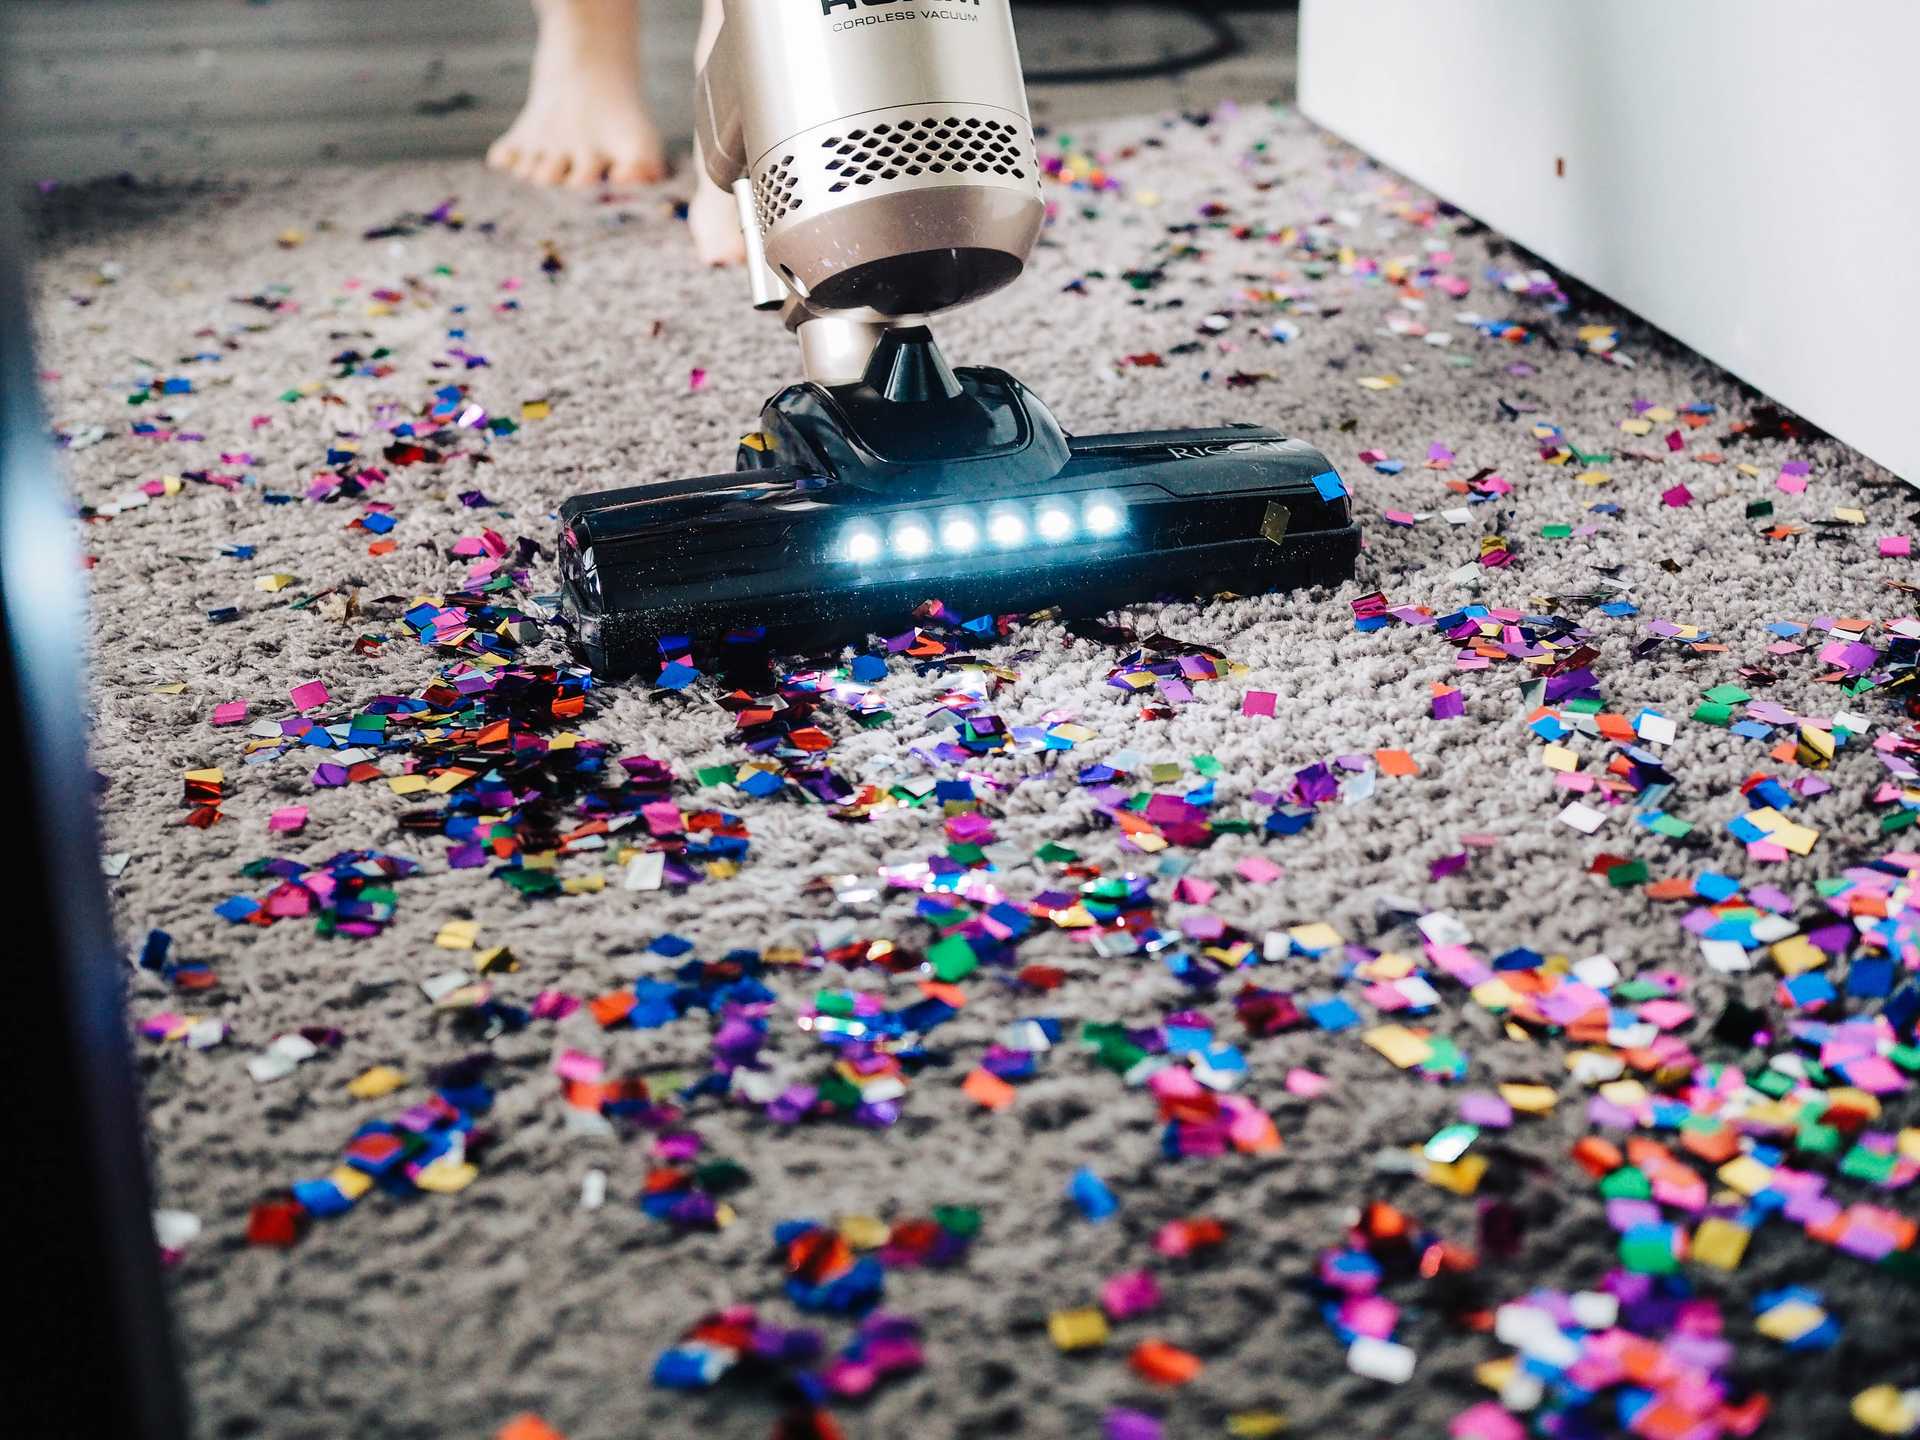 A vacuum cleaning up confetti after a party